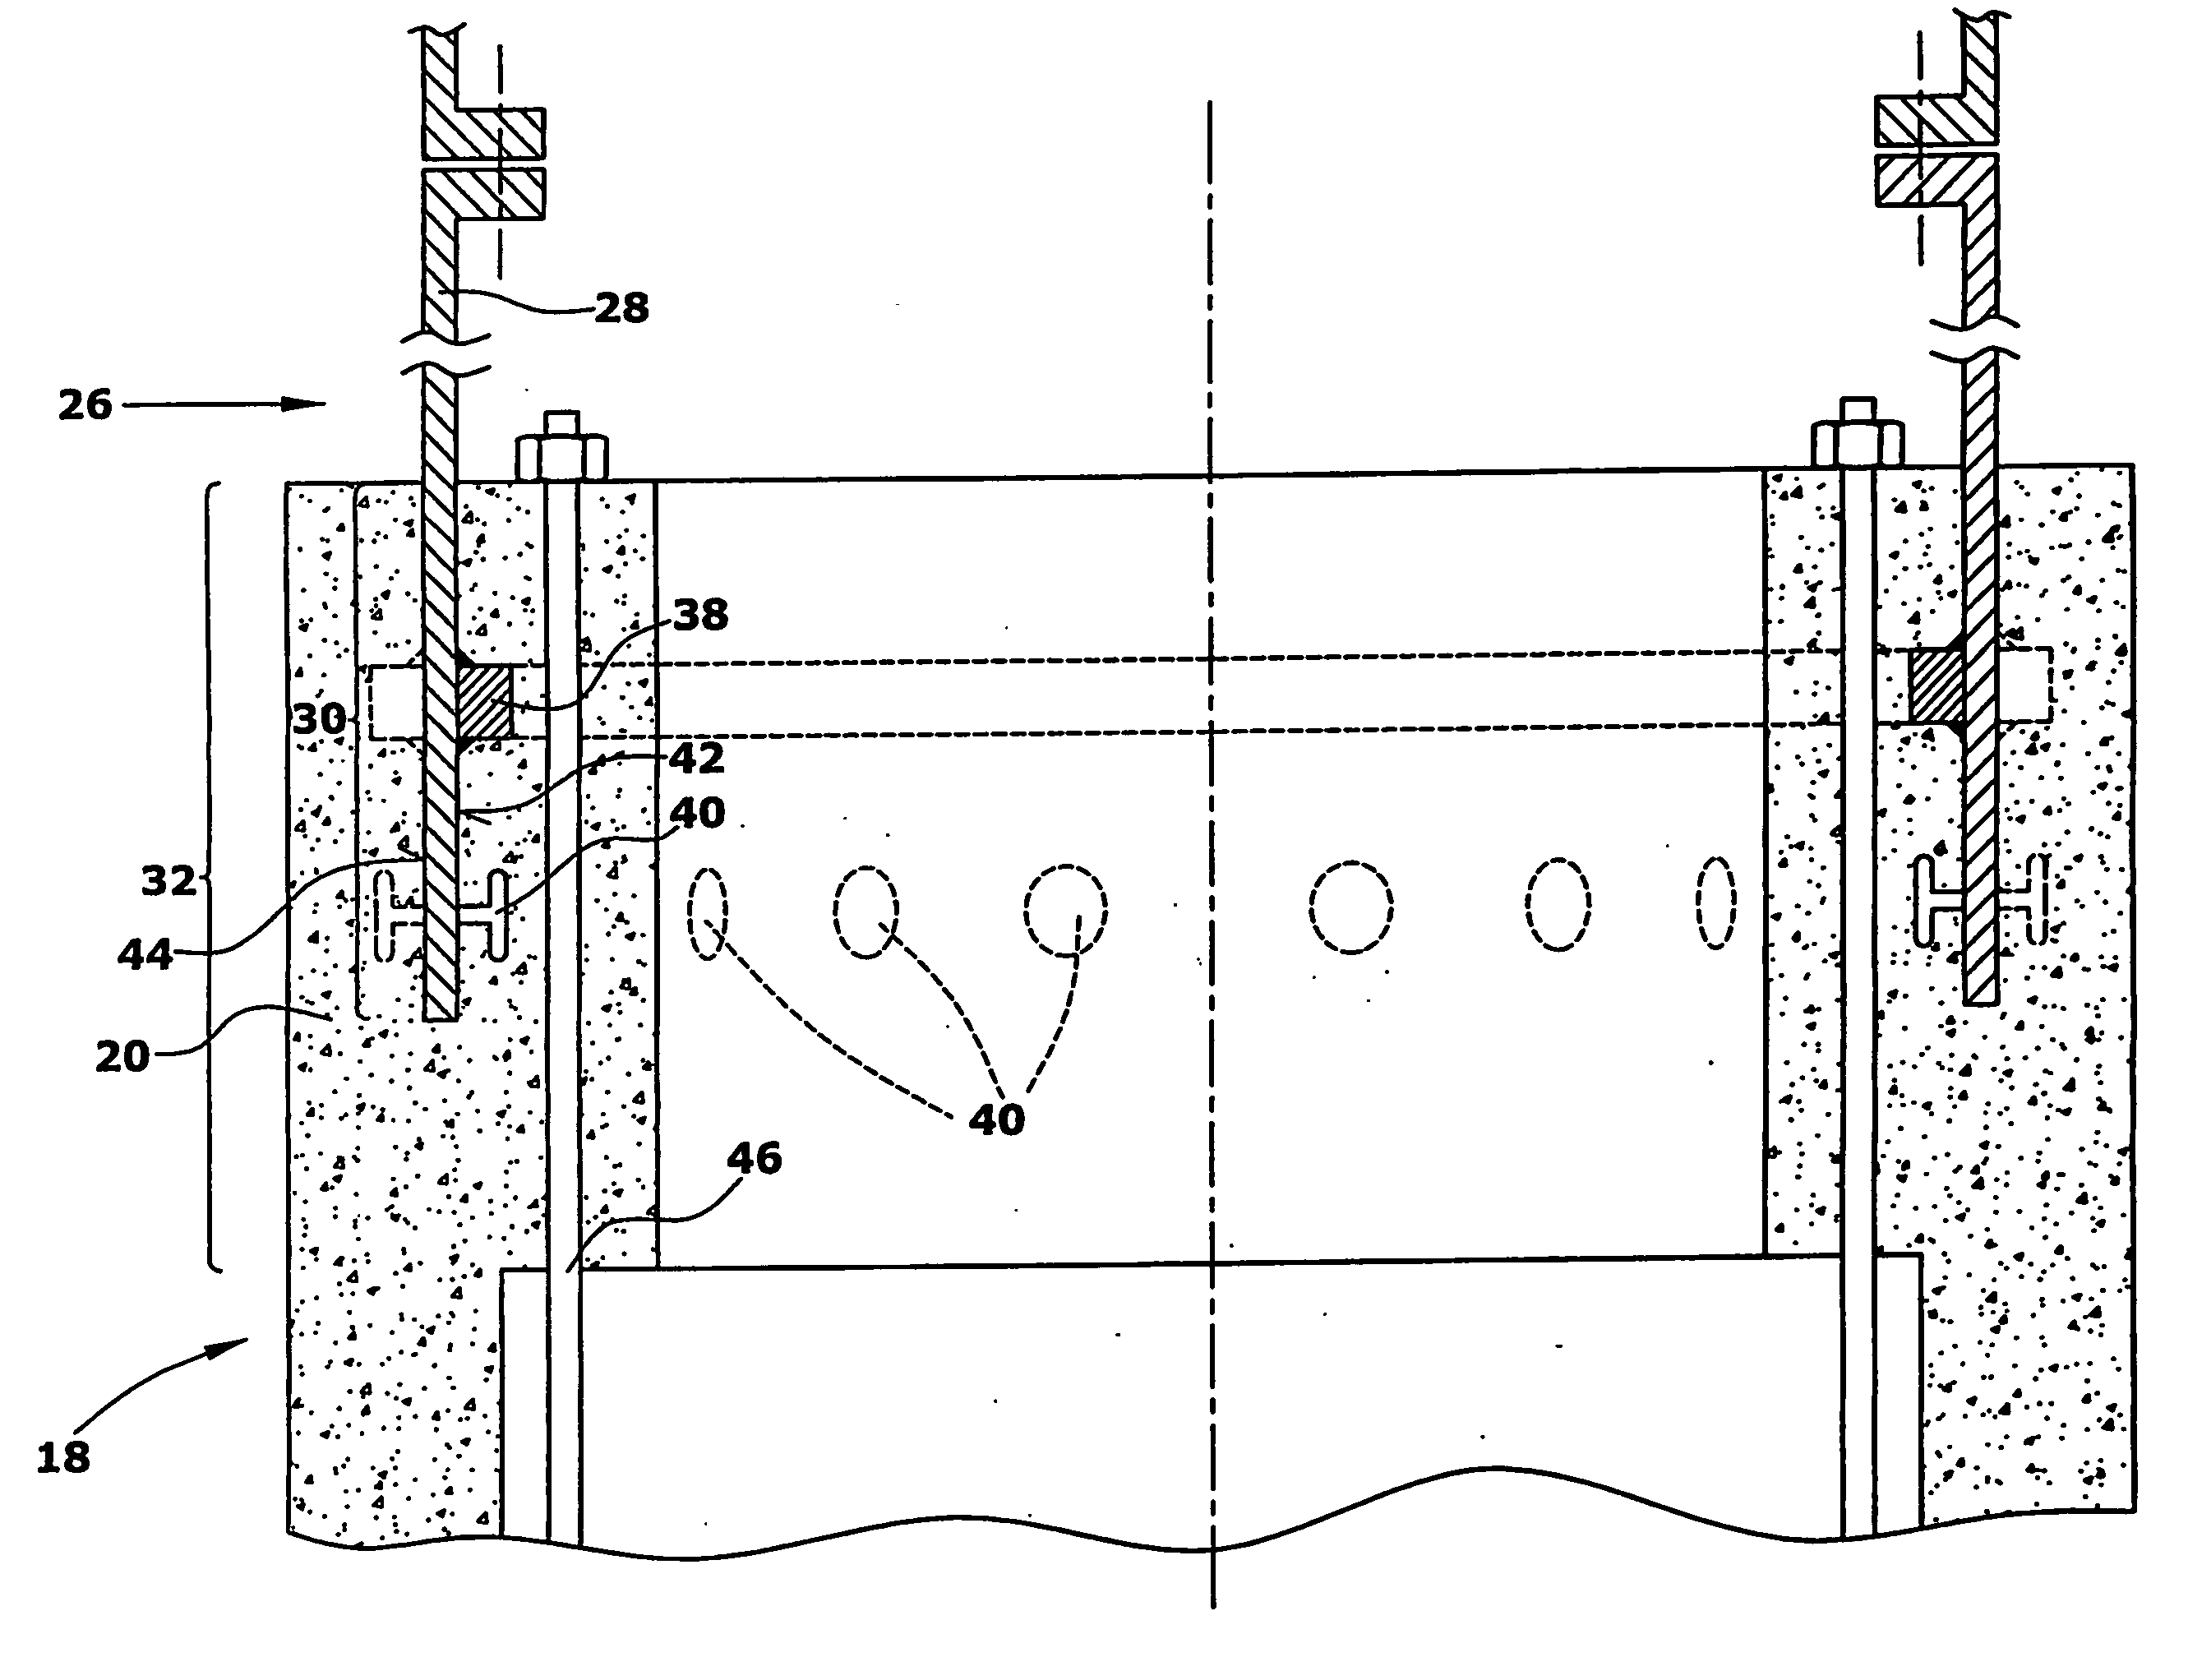 Tower foundation, in particular for a wind energy turbine